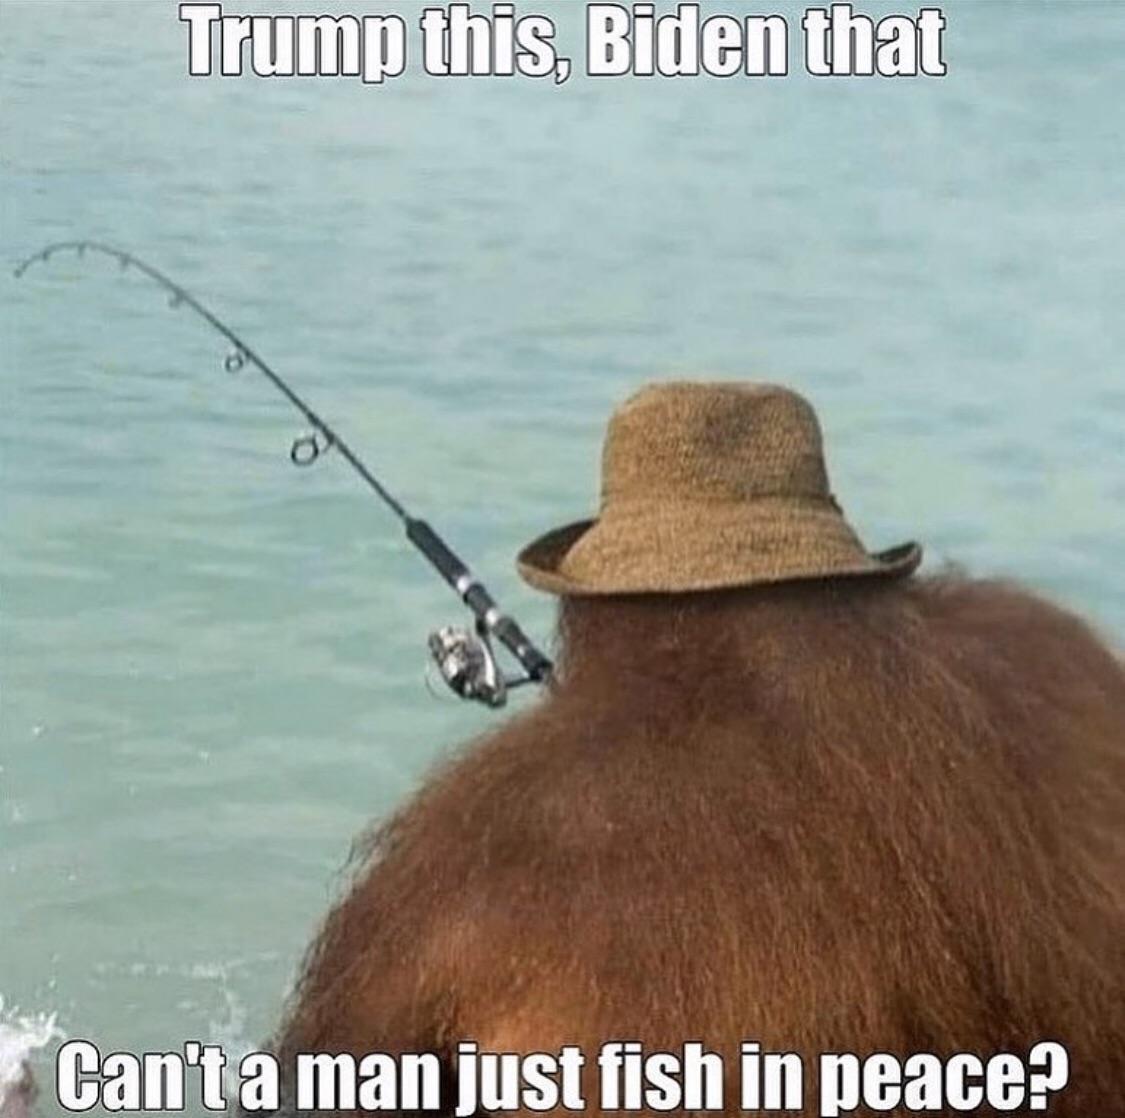 Let the man, fish. 